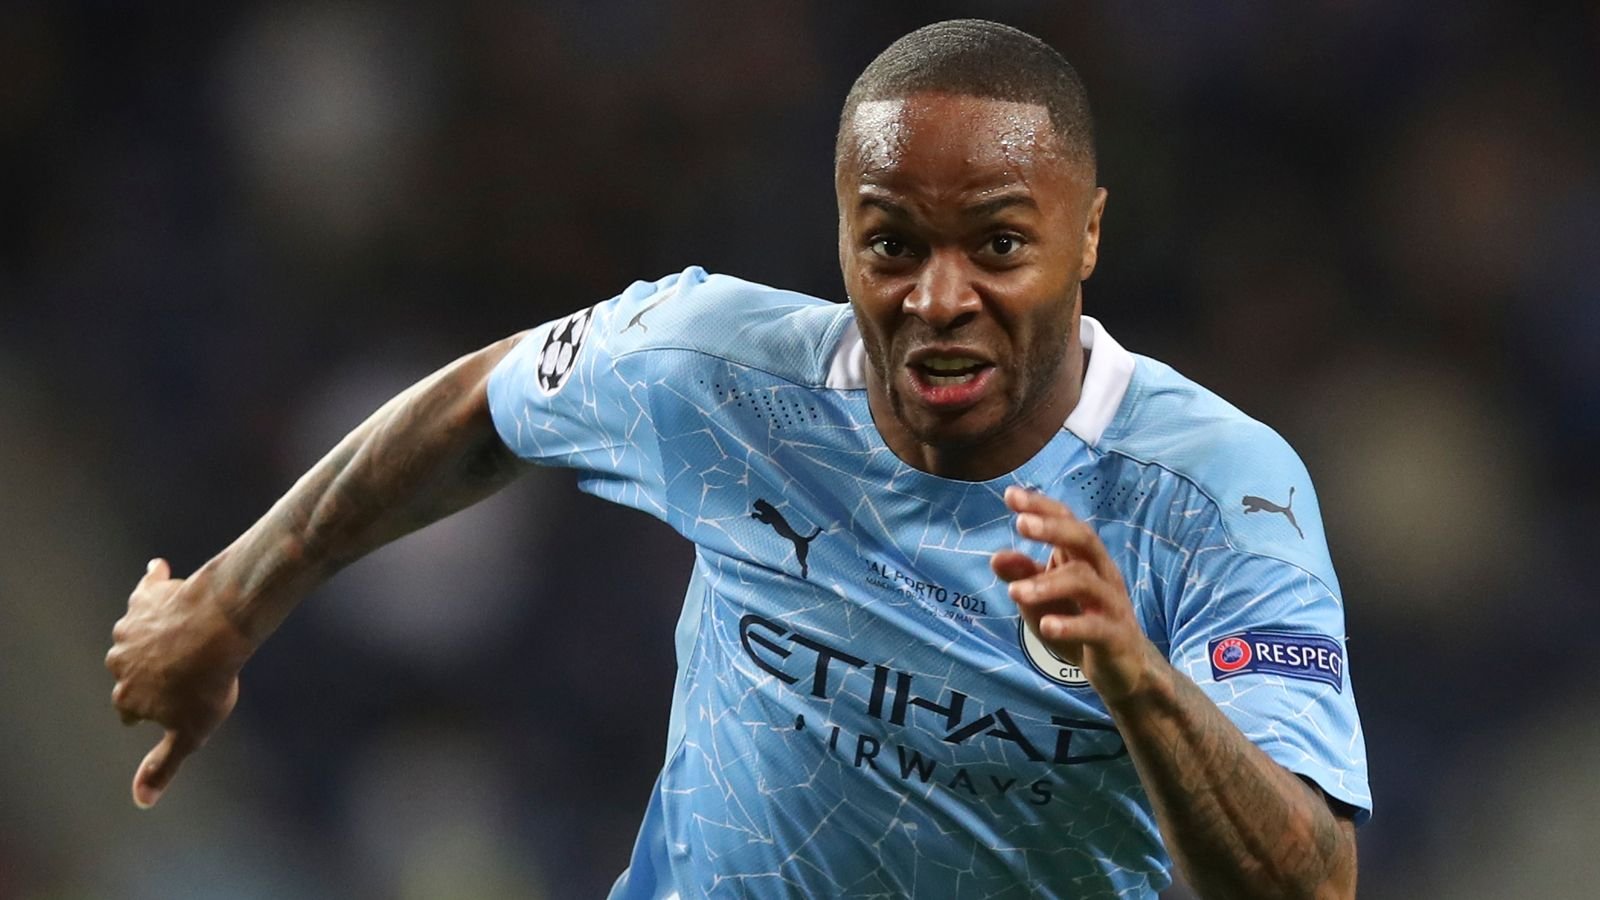 Raheem Sterling and Kyle Walker racially abused online after Man City's Champions League final defeat by Chelsea